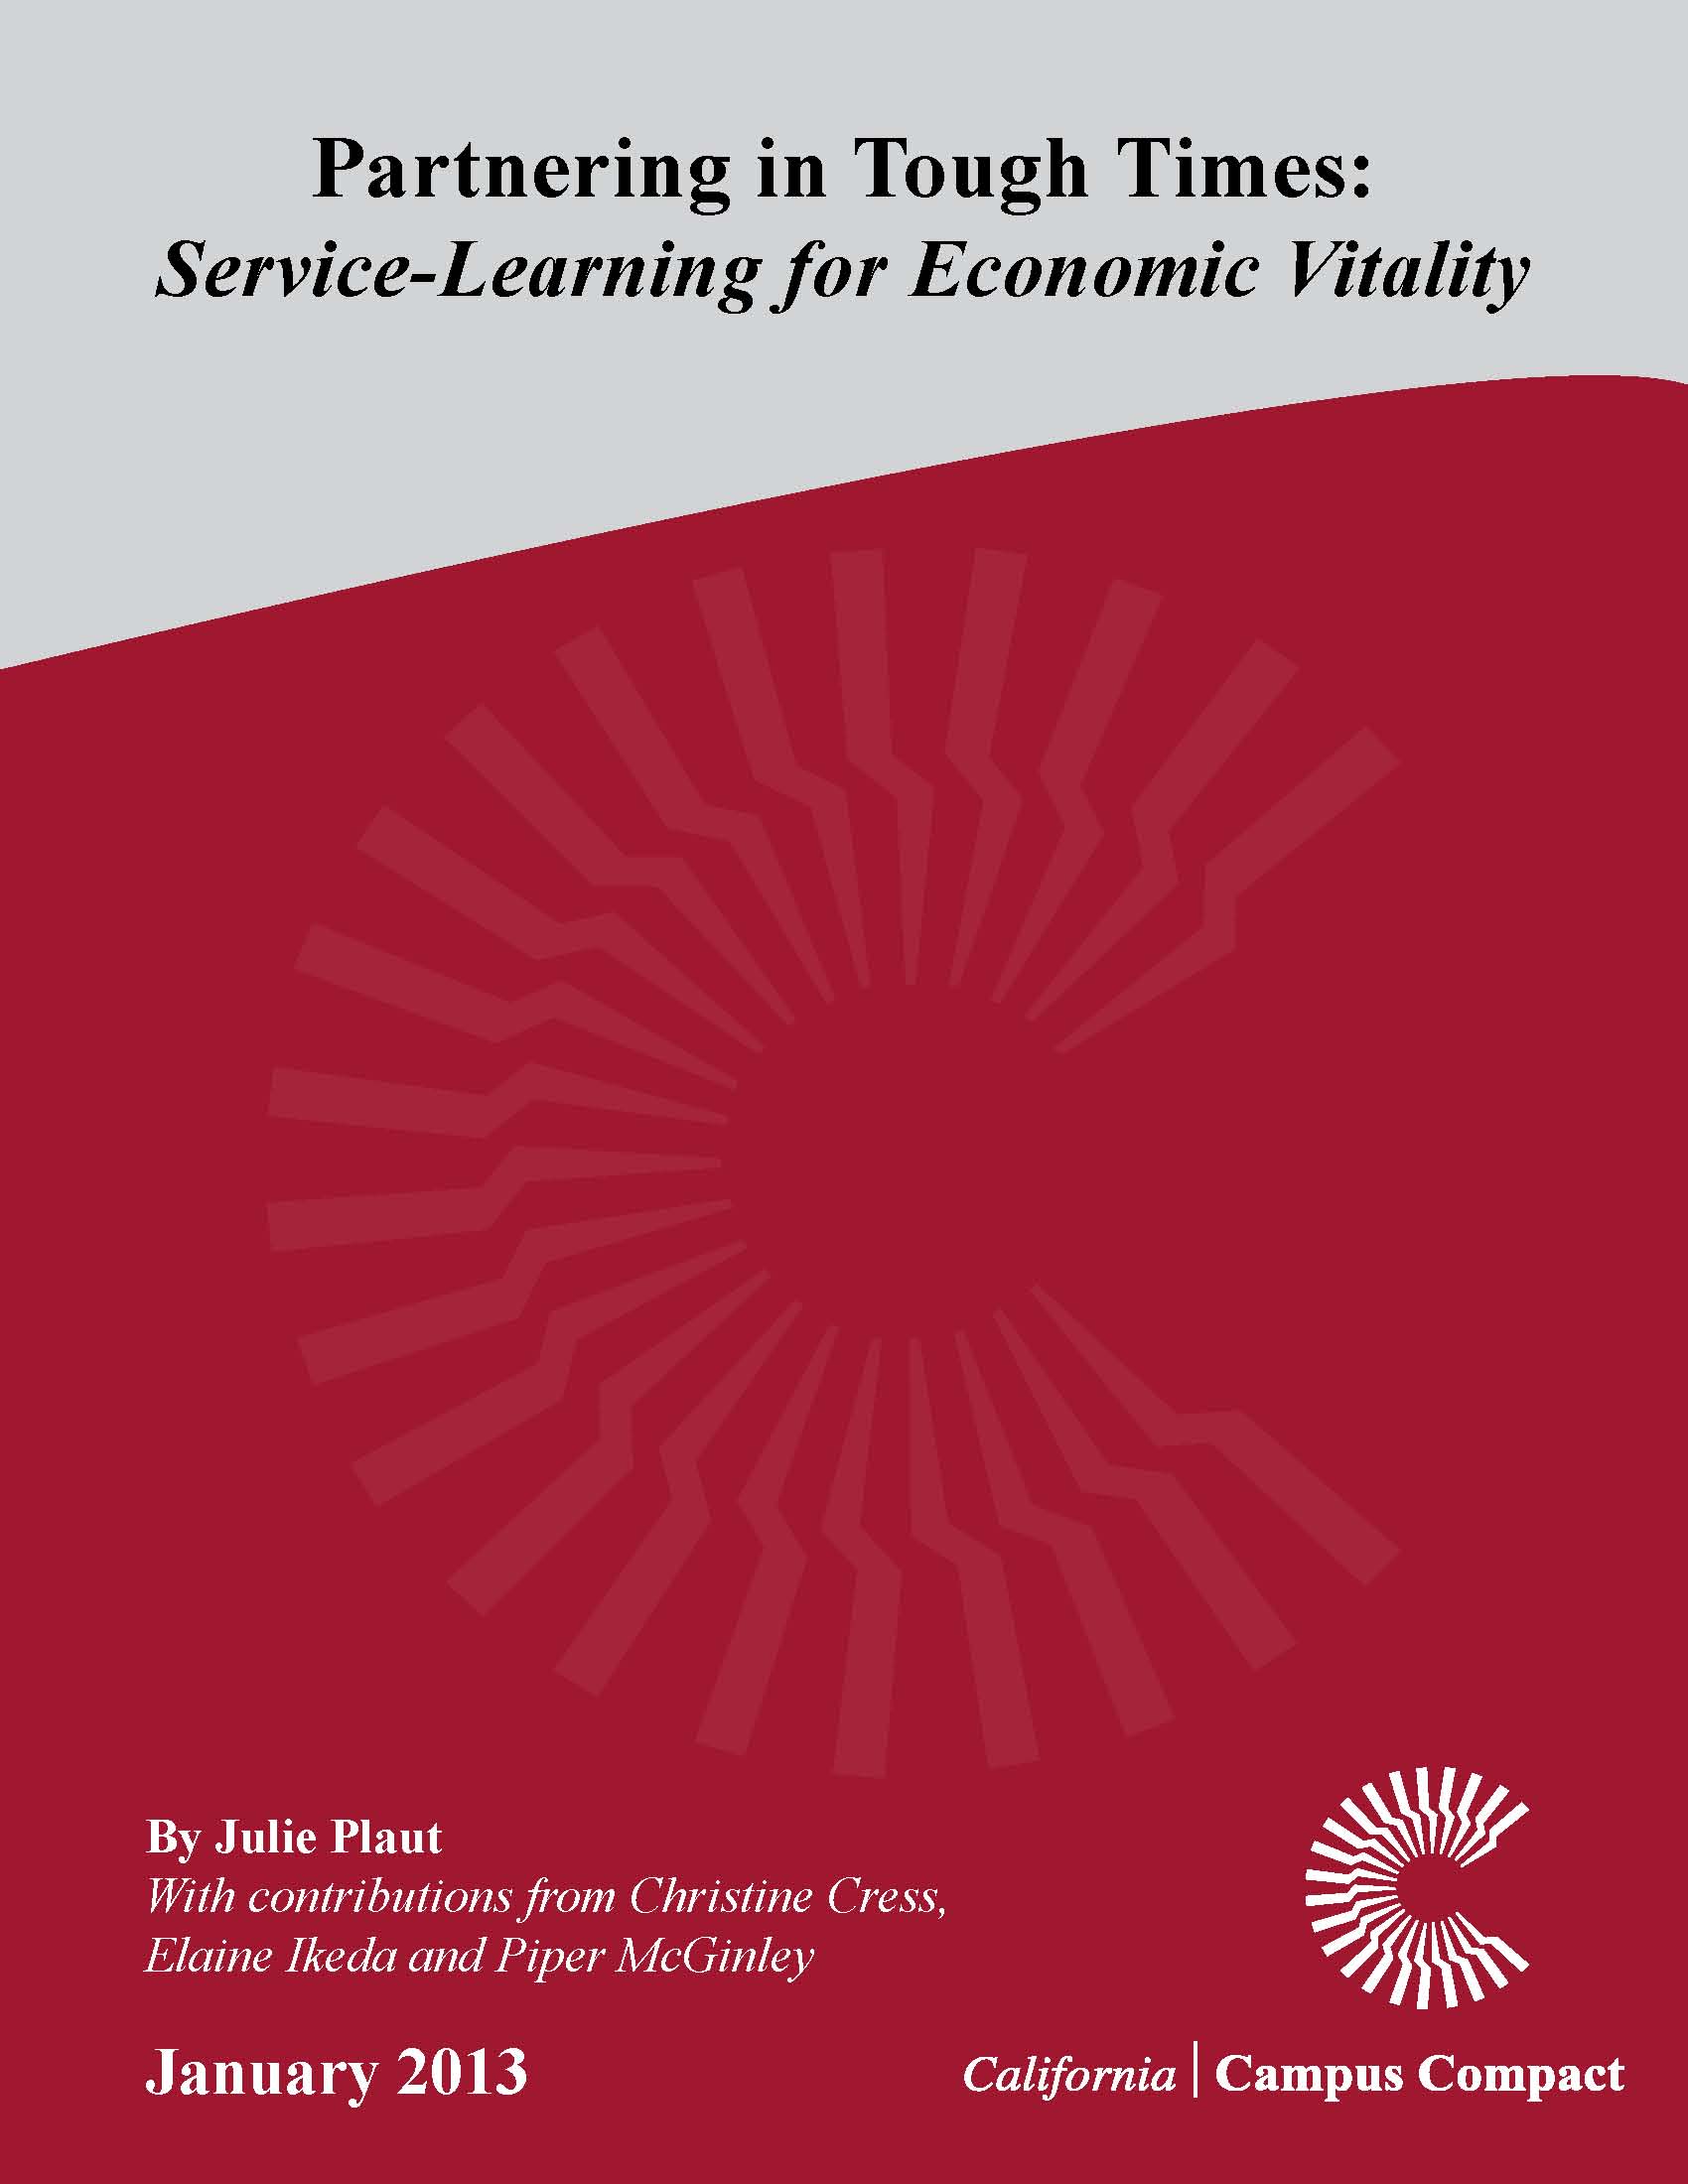 Partnering in Tough Times: Service-Learning for Economic Vitality